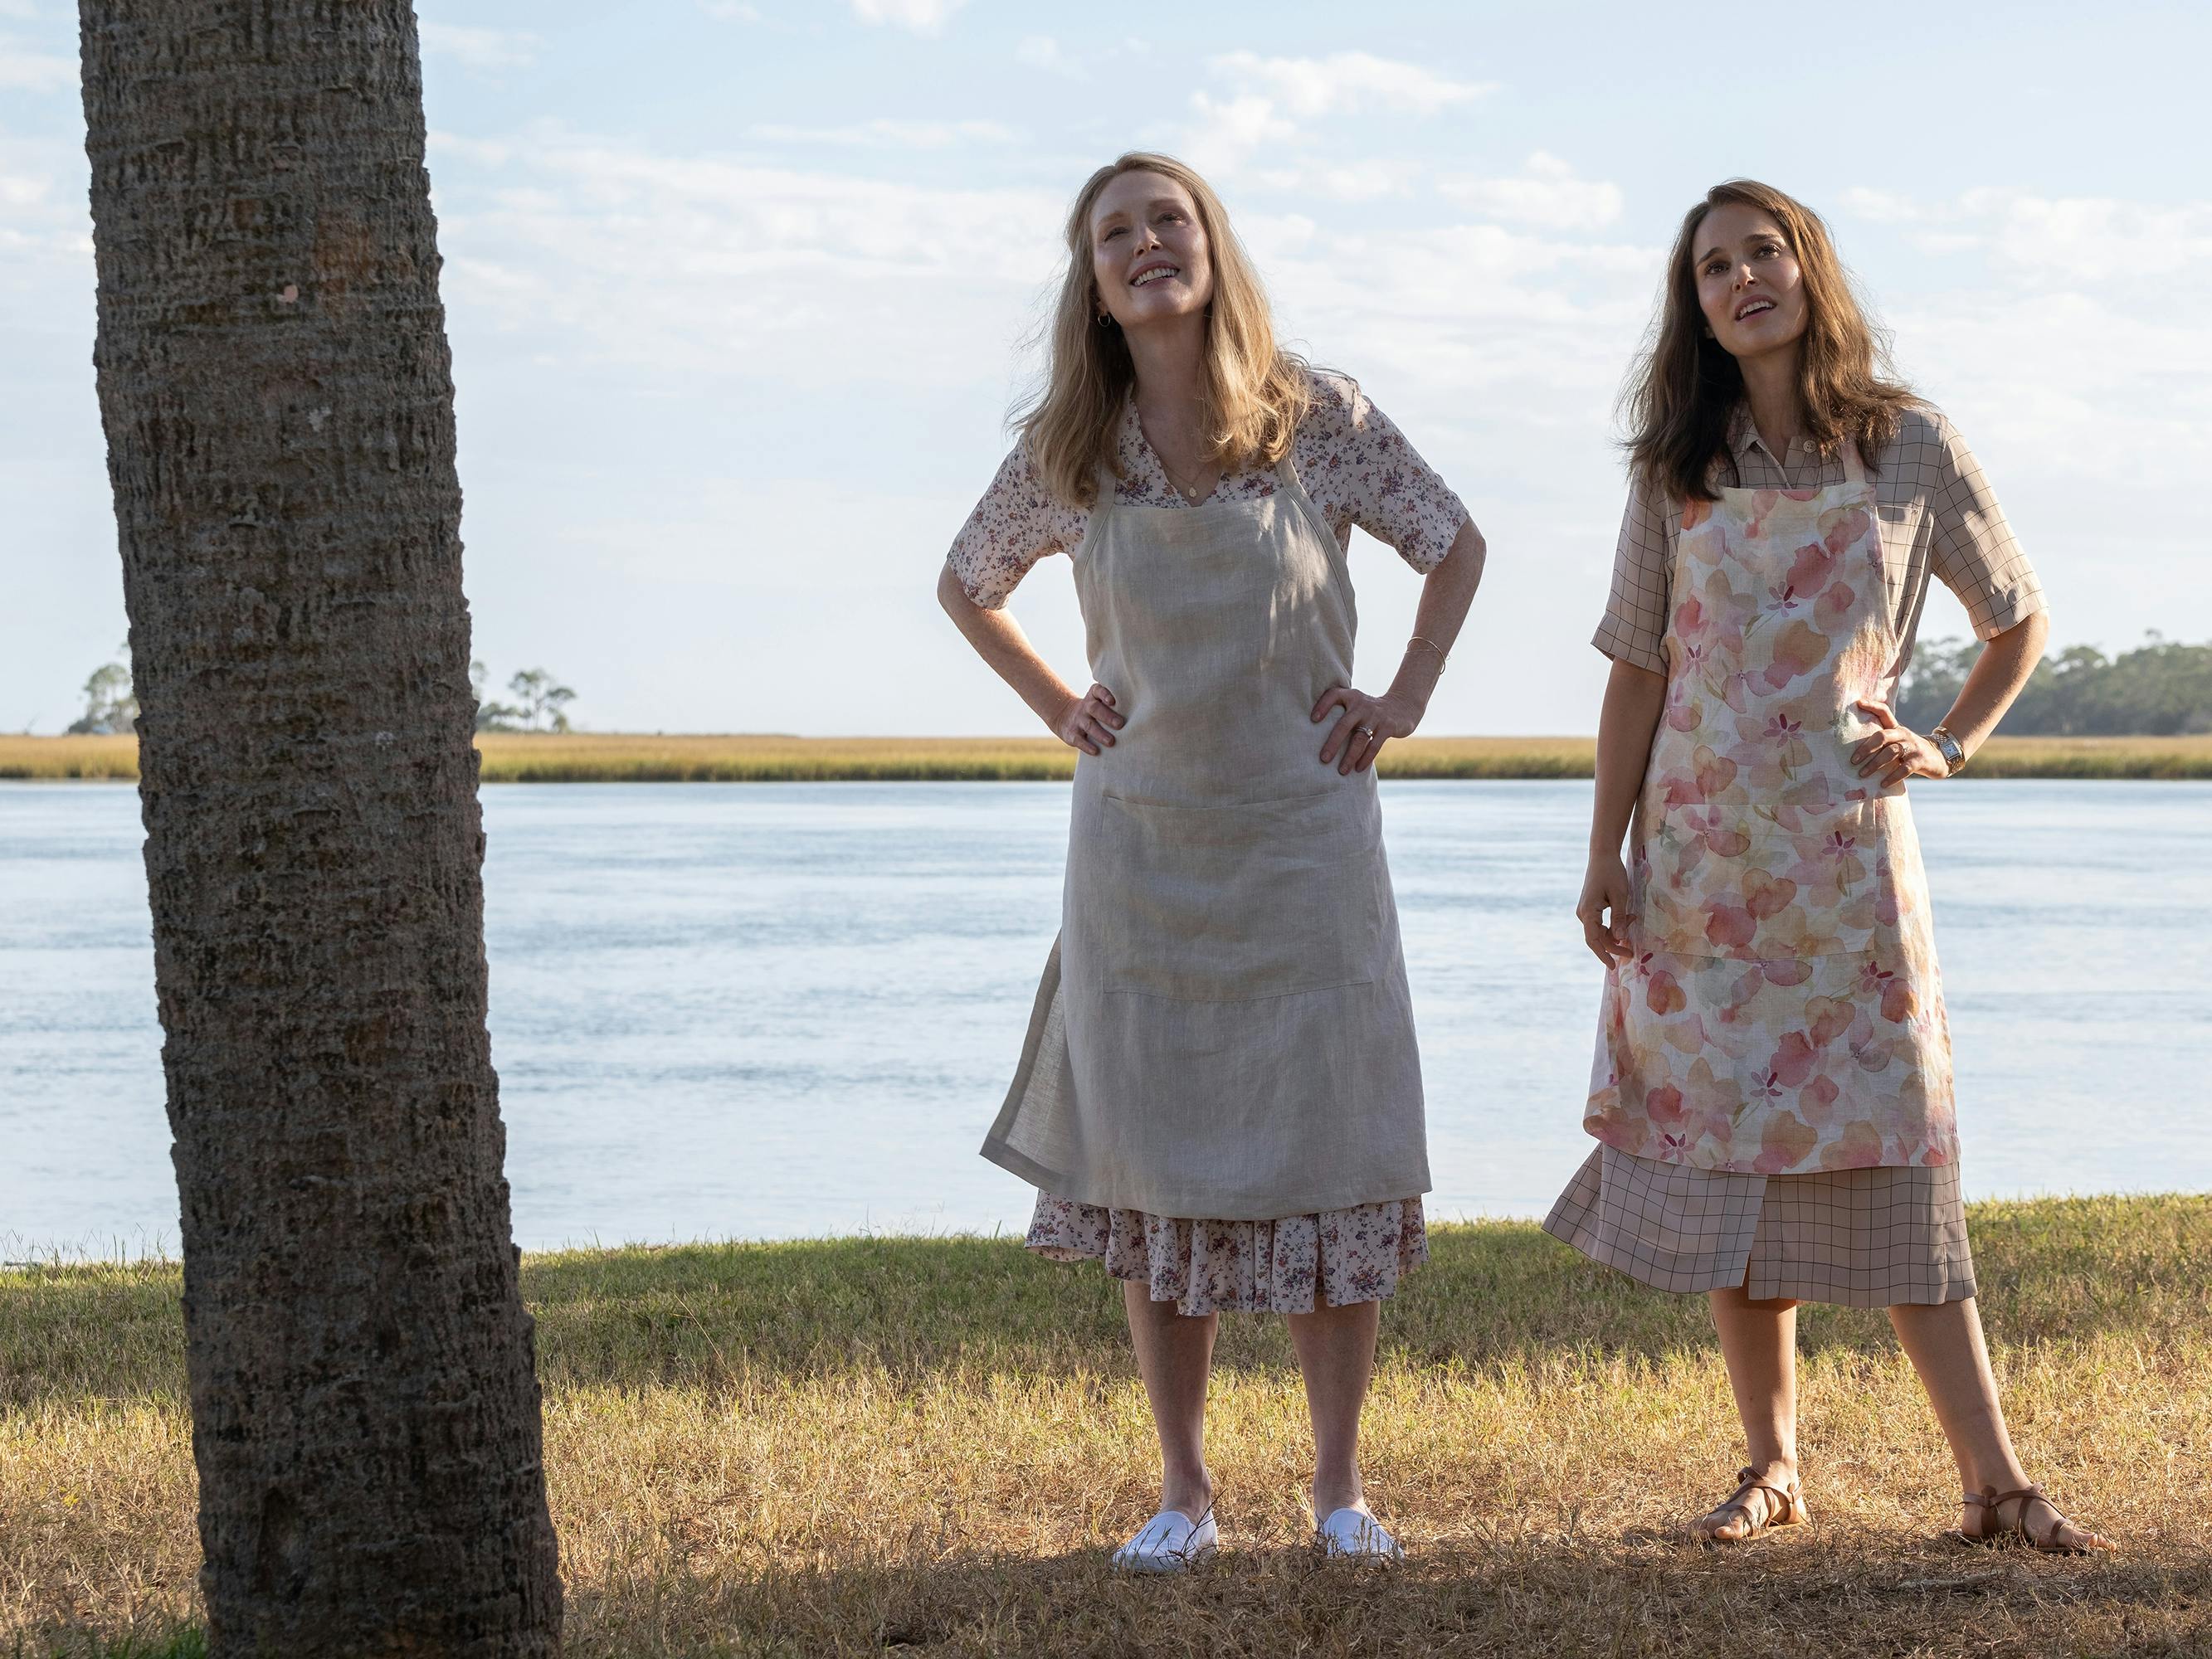 Gracie (Julianne Moore) and Elizabeth (Natalie Portman) stand together by a bay of water. Both wear aprons and midi-length dresses. They crane their necks looking at something in the sky.